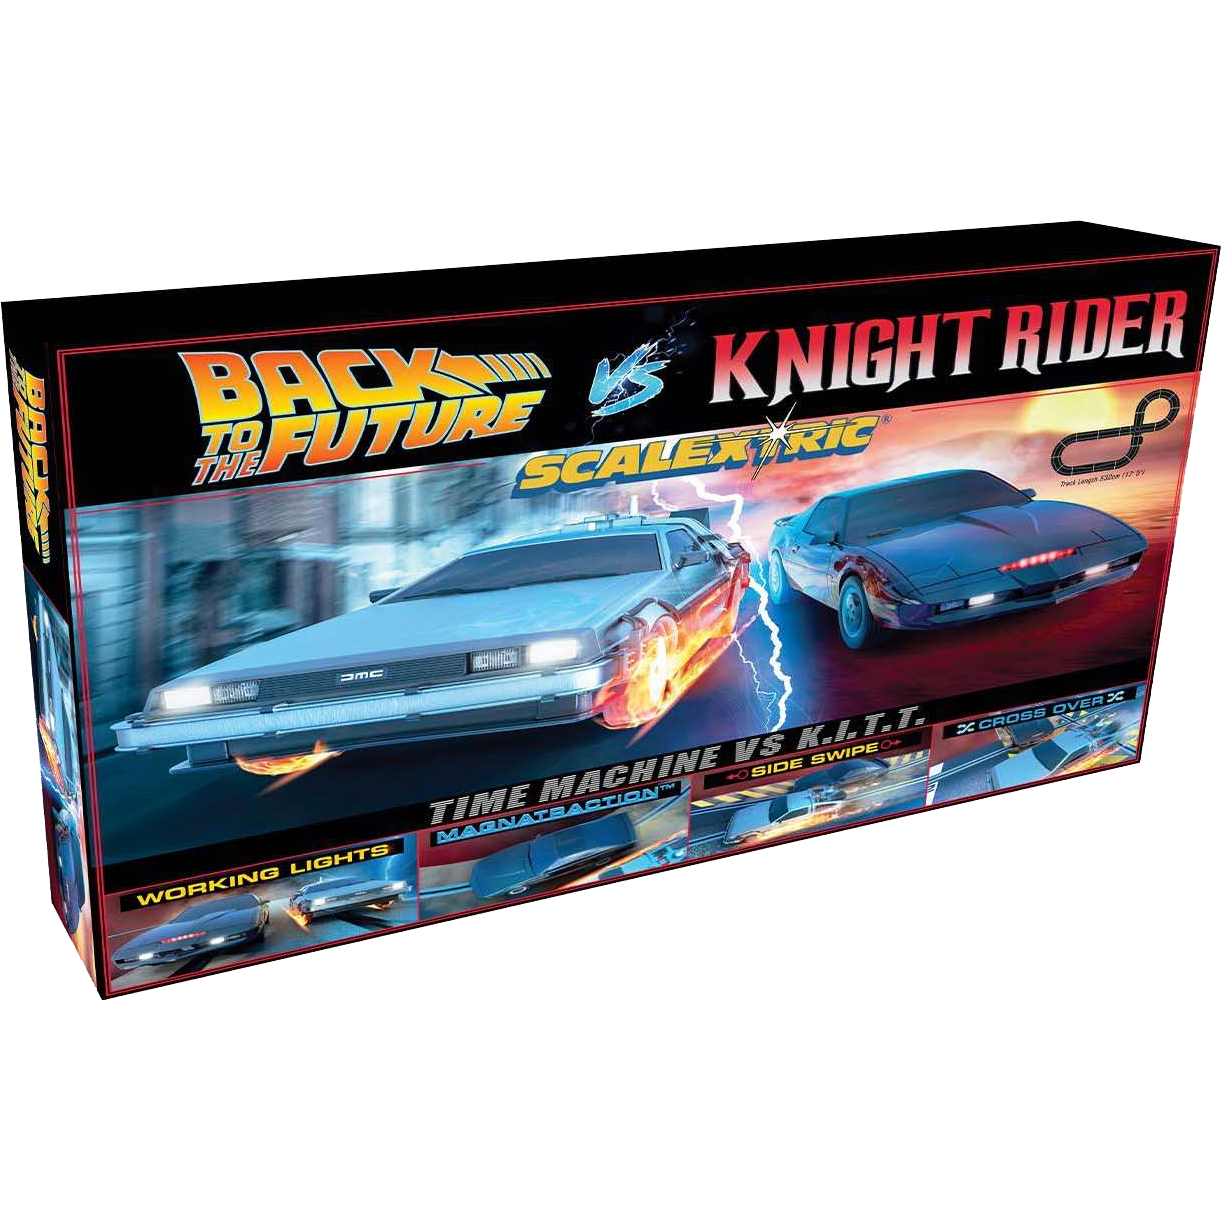 Scalextric 1980's TV - Back to the Future vs Knight Rider 1:32 scale slot car race set